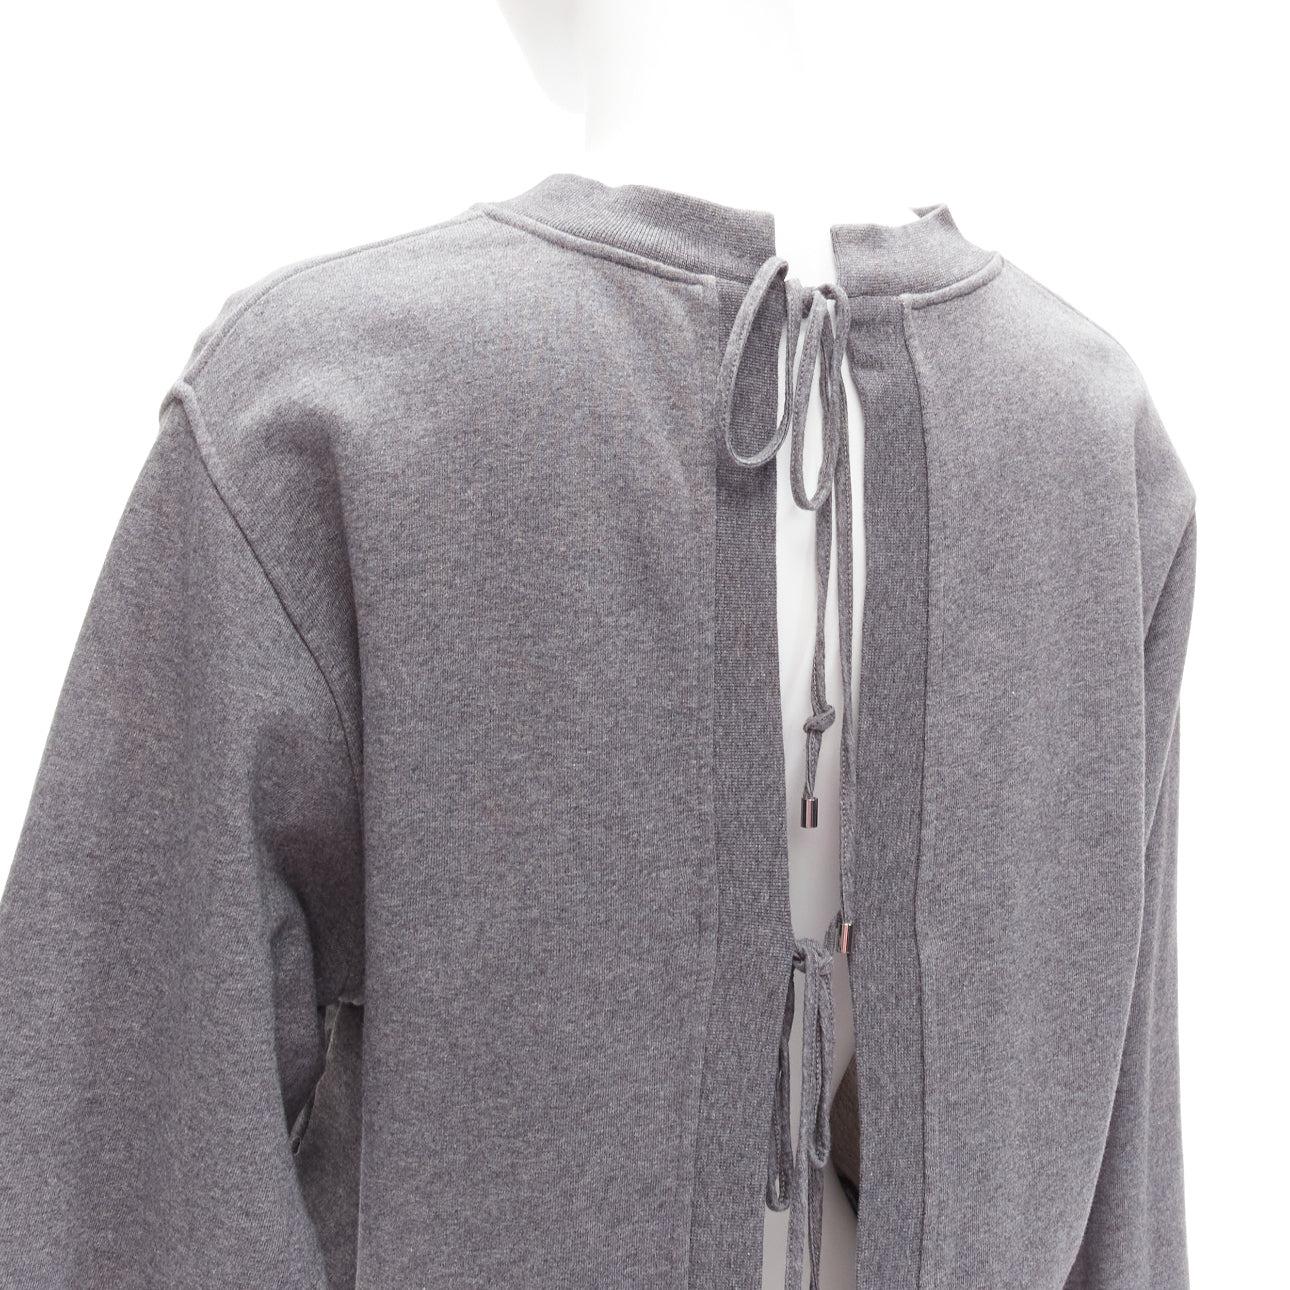 ALEXANDER WANG T grey cotton tie back cut out crew neck sweater S
Reference: JACG/A00115
Brand: Alexander Wang T
Collection: T
Material: Cotton
Color: Grey
Pattern: Solid
Closure: Self Tie
Extra Details: Self tie back and cut out design.
Made in: